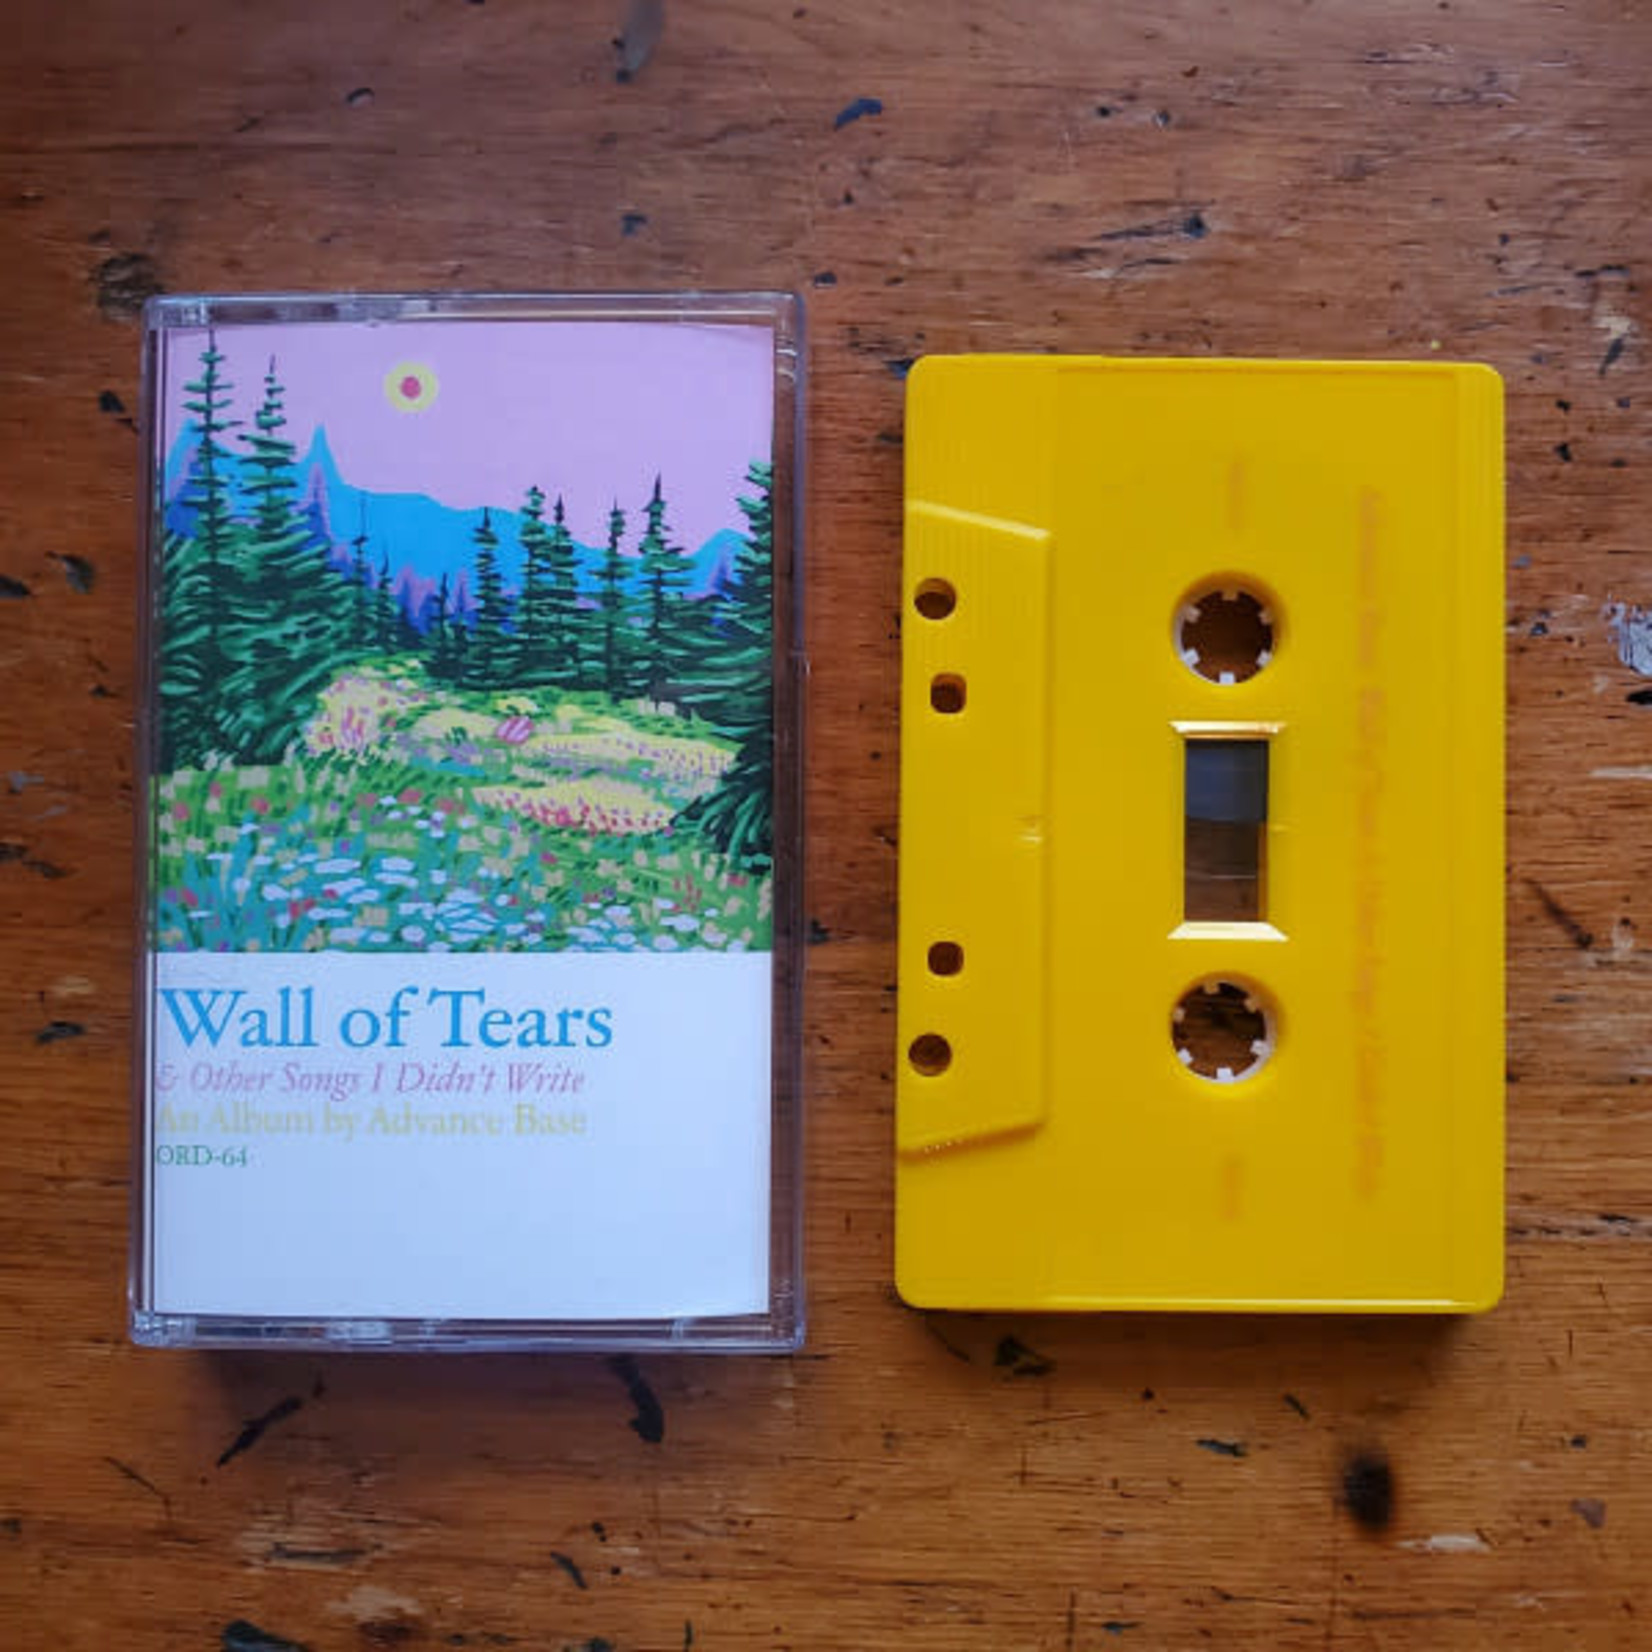 Orindal Advance Base - Wall of Tears & Other Songs I Didn't Write (Tape)